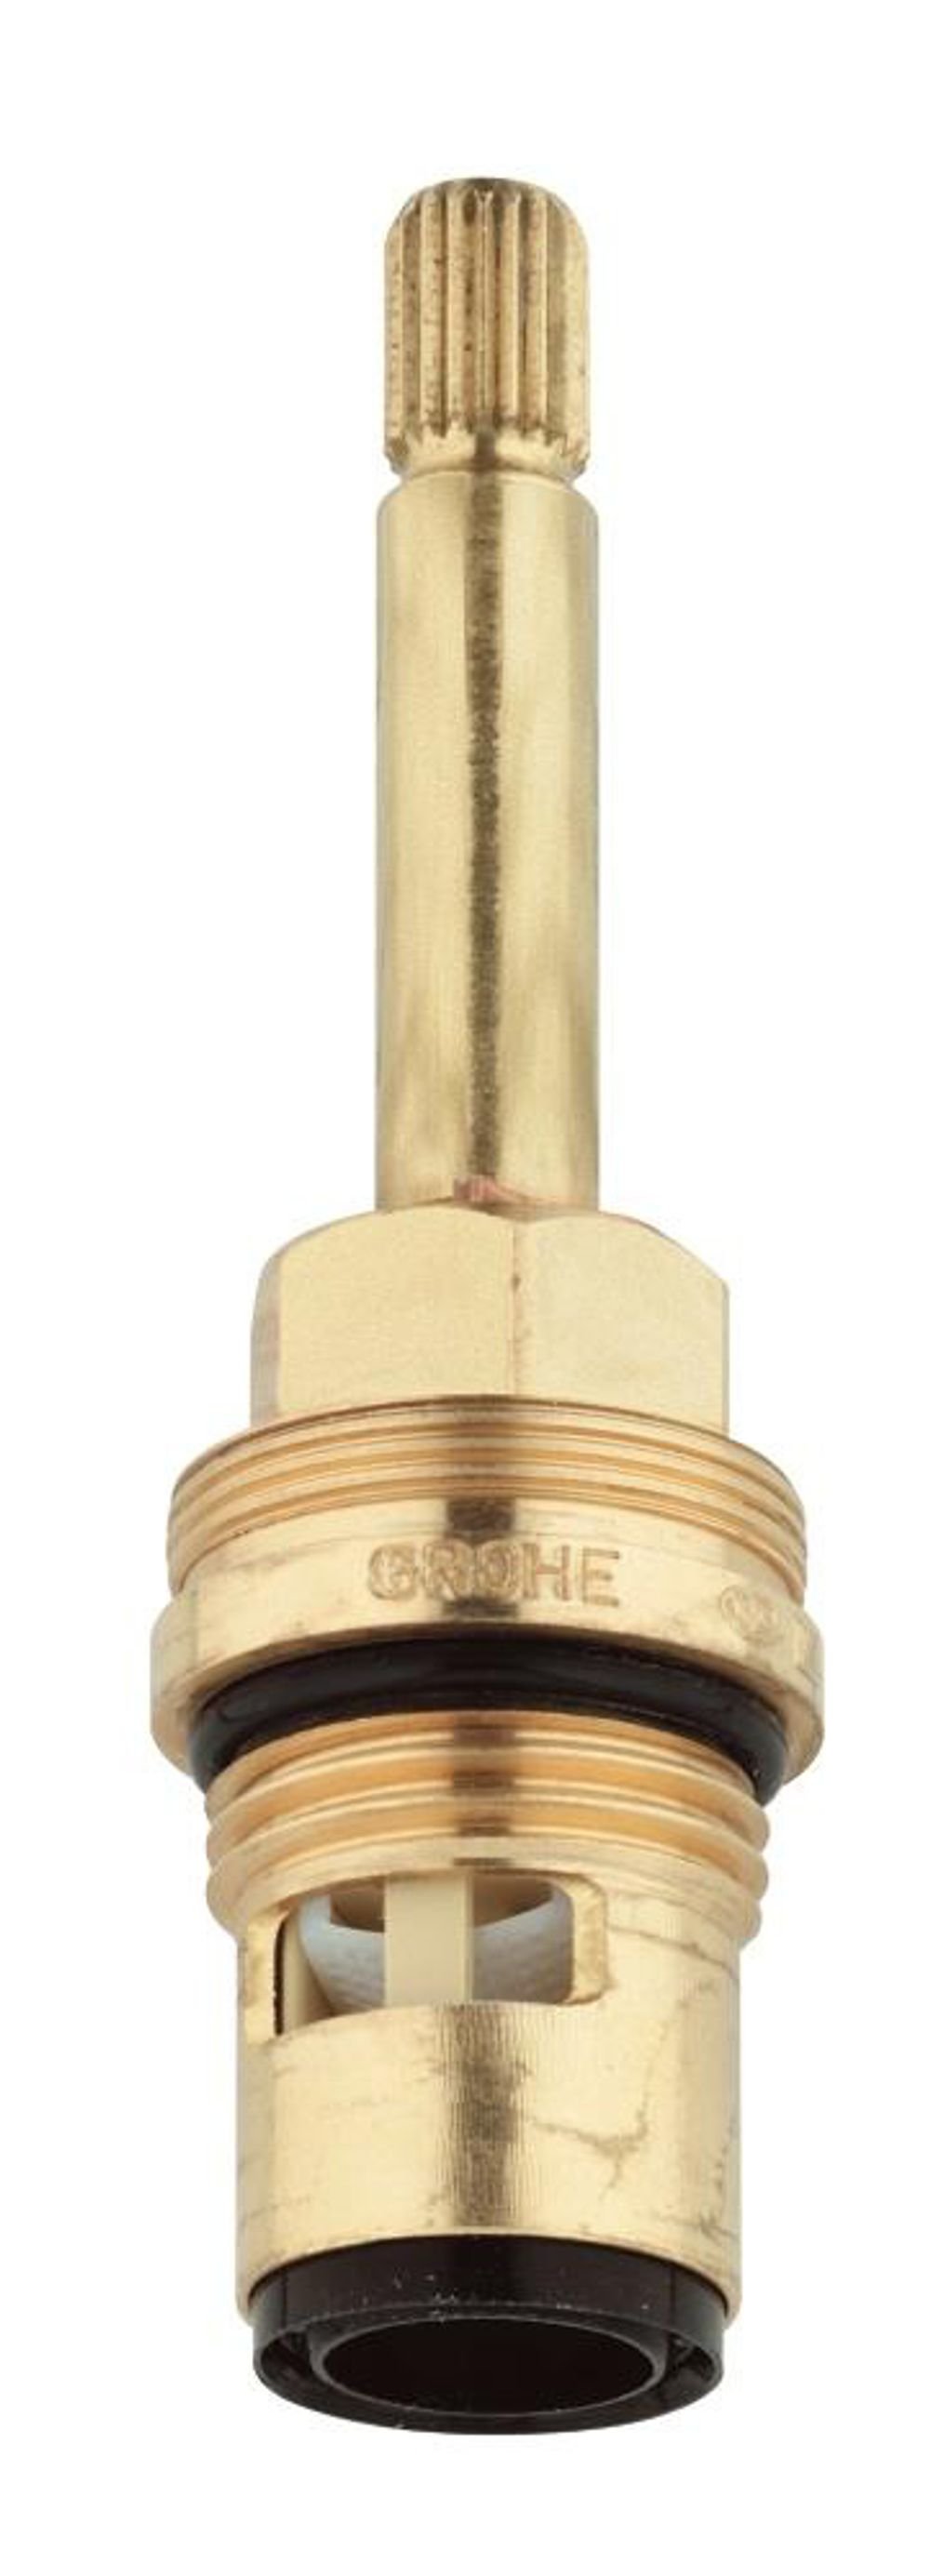 Grohe 06709 Headpart